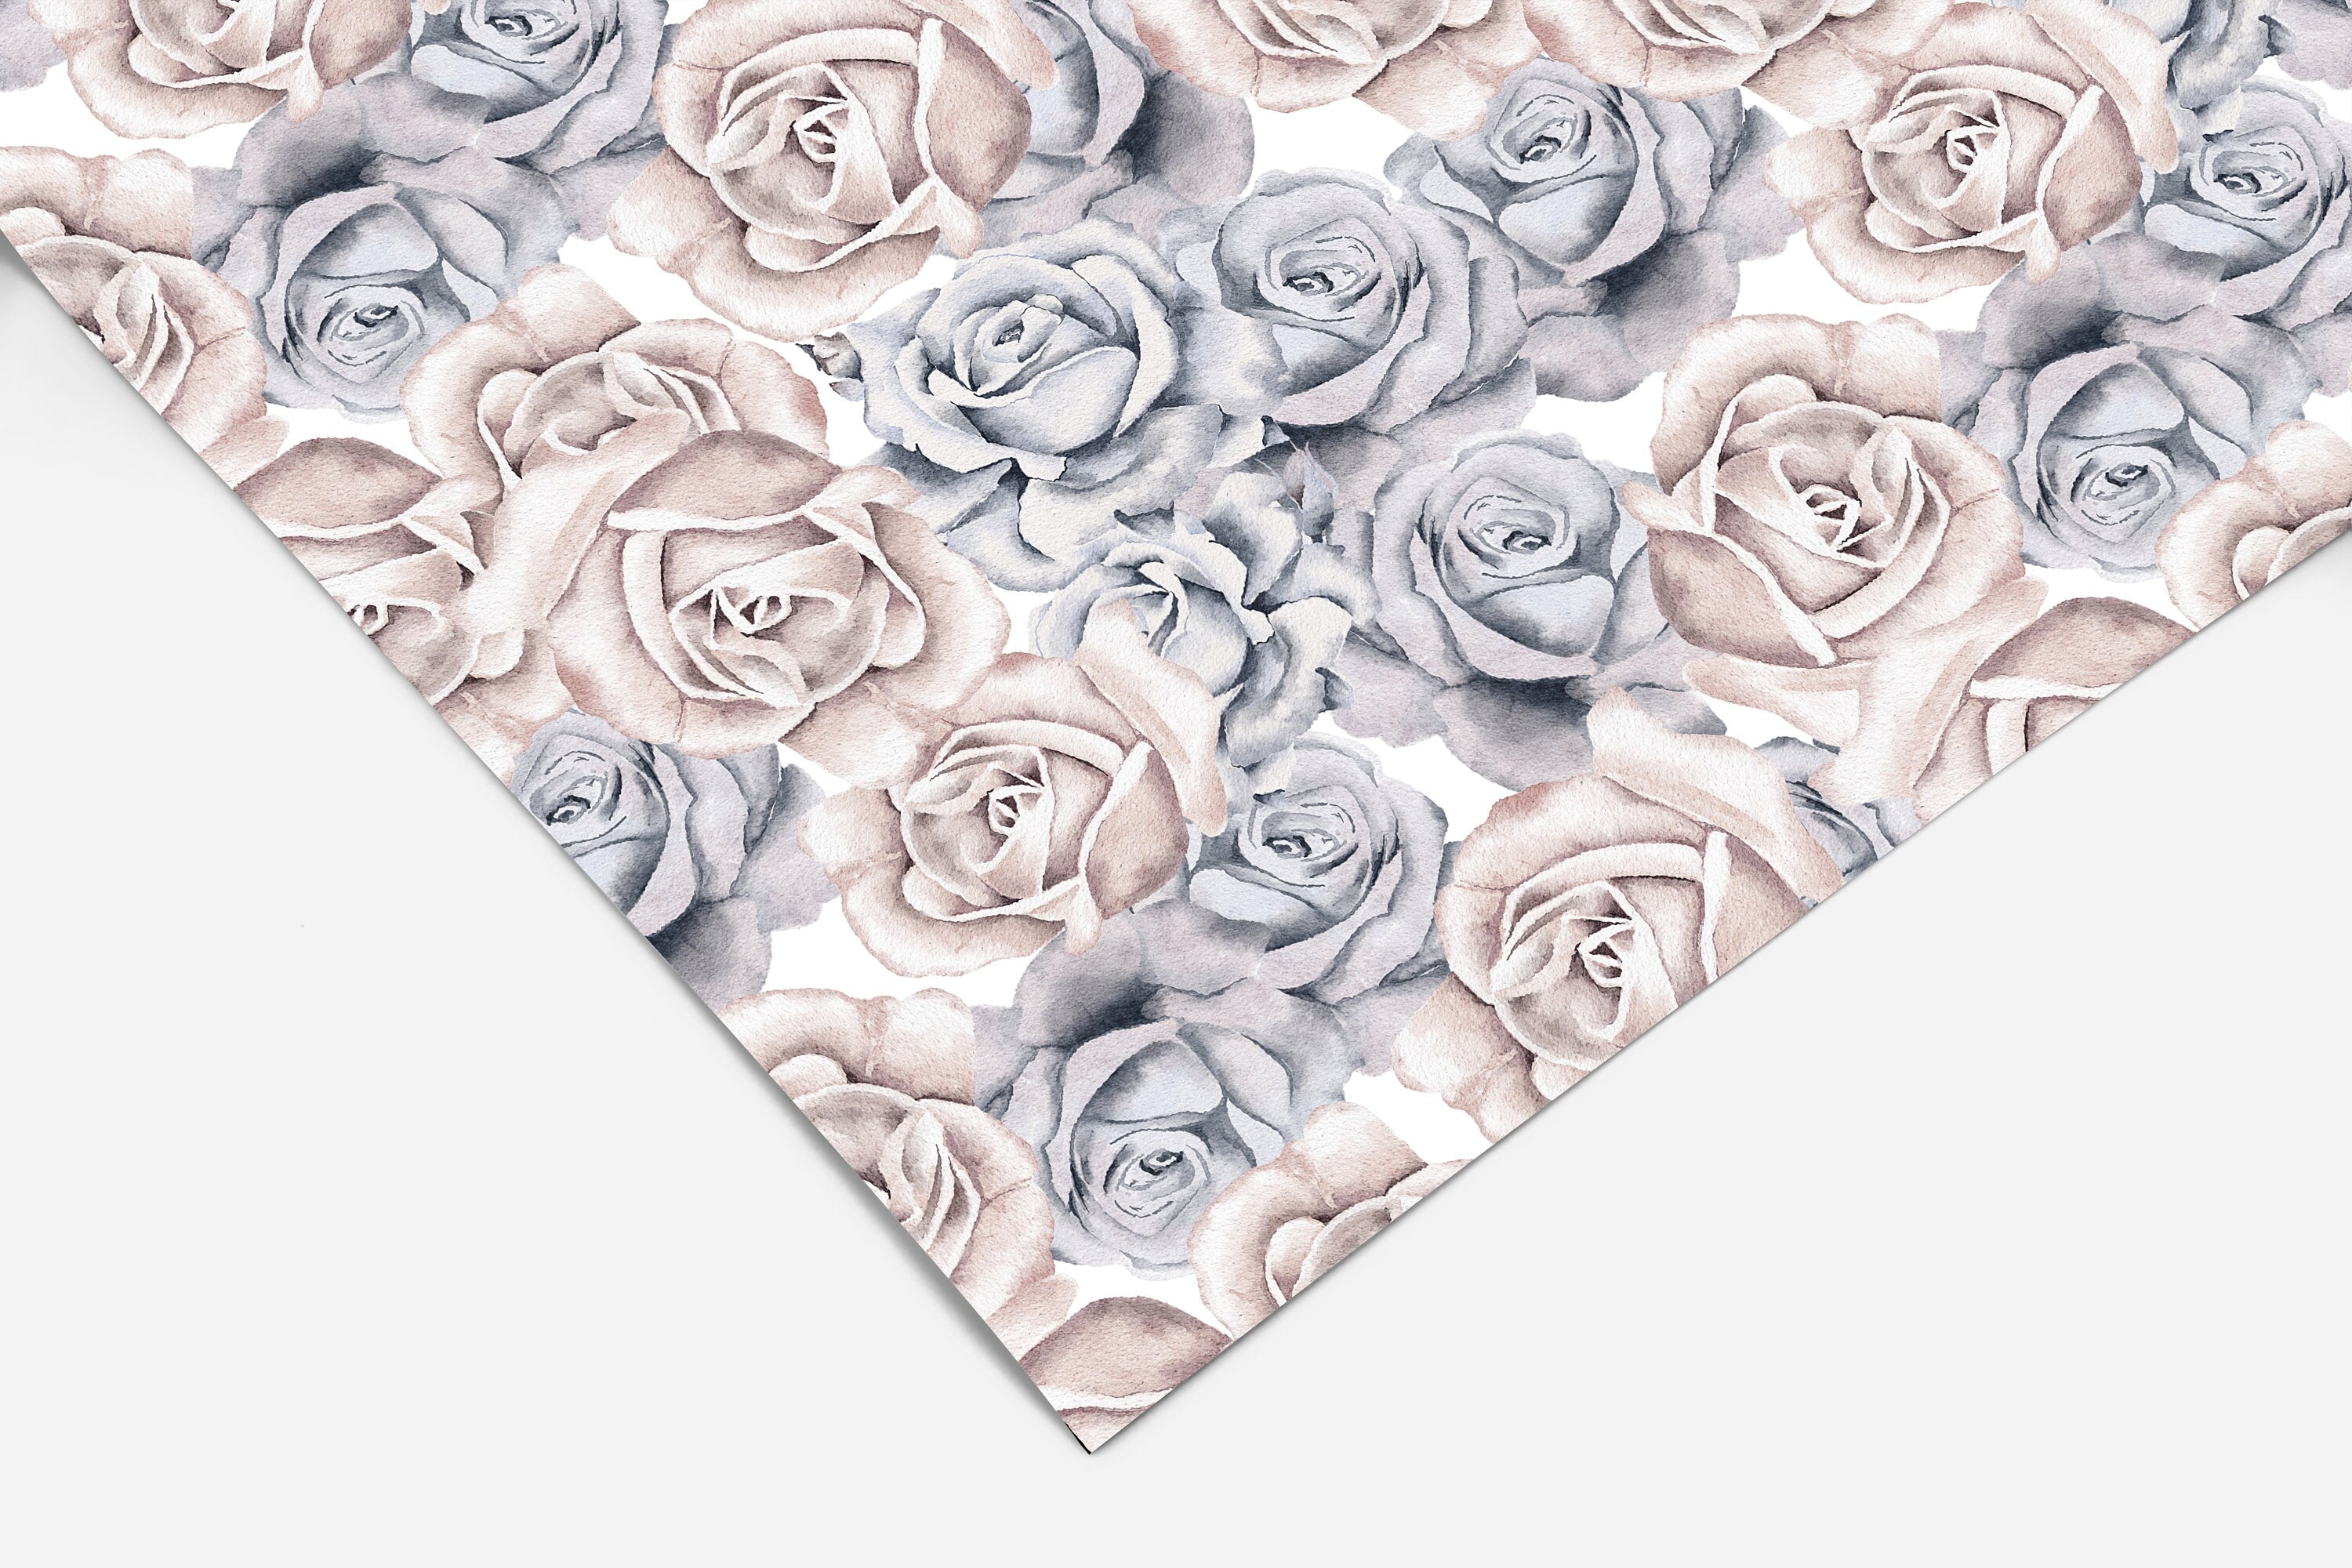 Pink Blue Rose Floral Contact Paper | Peel And Stick Wallpaper | Removable Wallpaper | Shelf Liner | Drawer Liner | Peel and Stick Paper 329